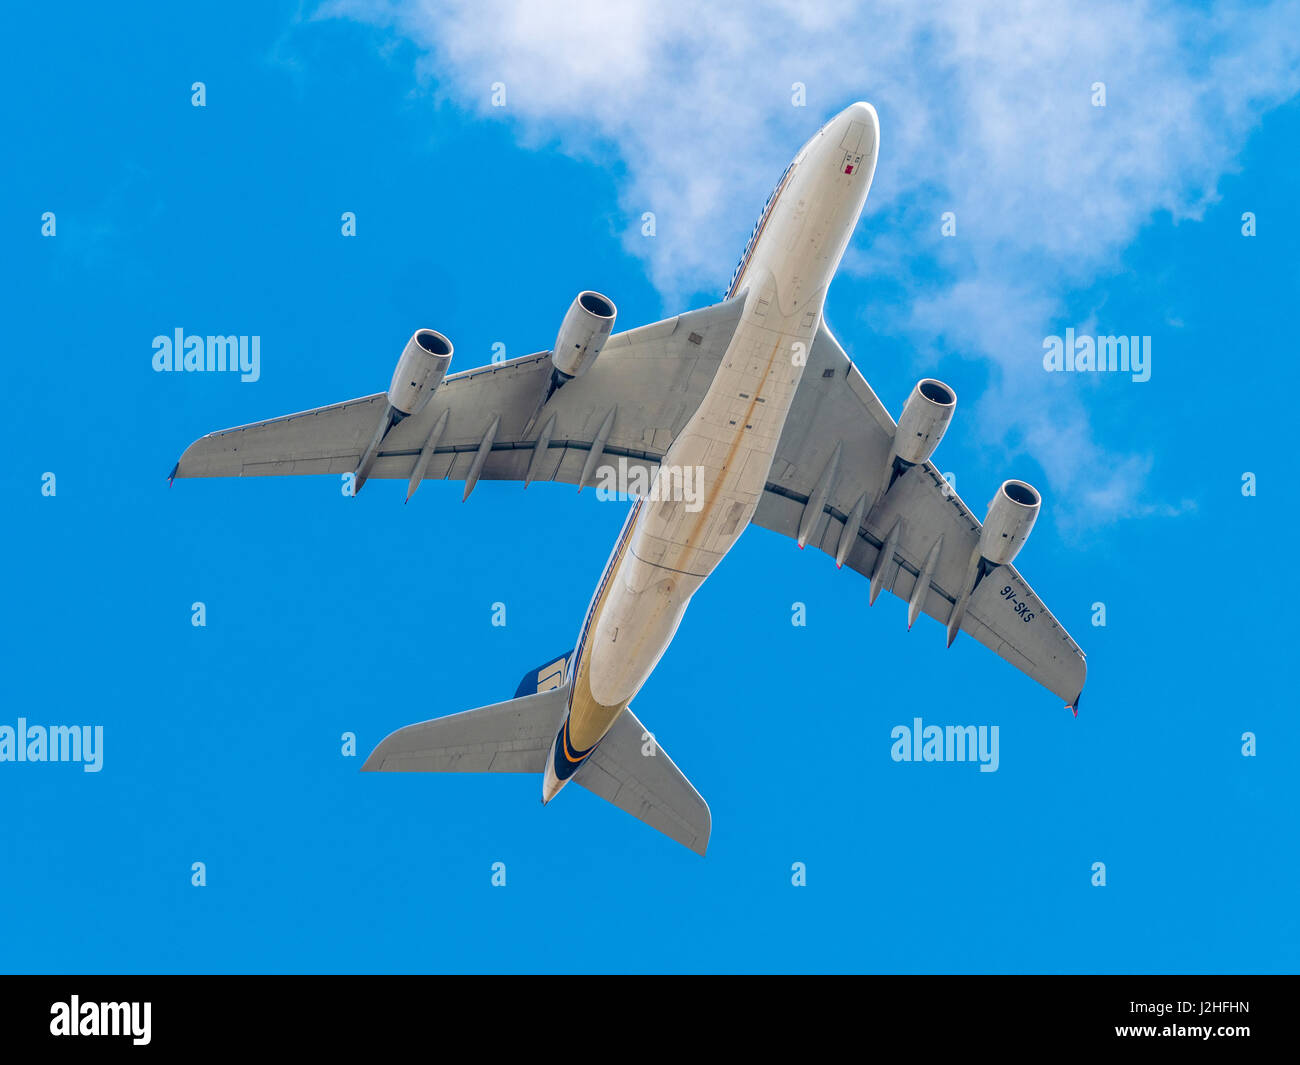 Jet passenger plane against blue sky with clouds seen from below. Stock Photo